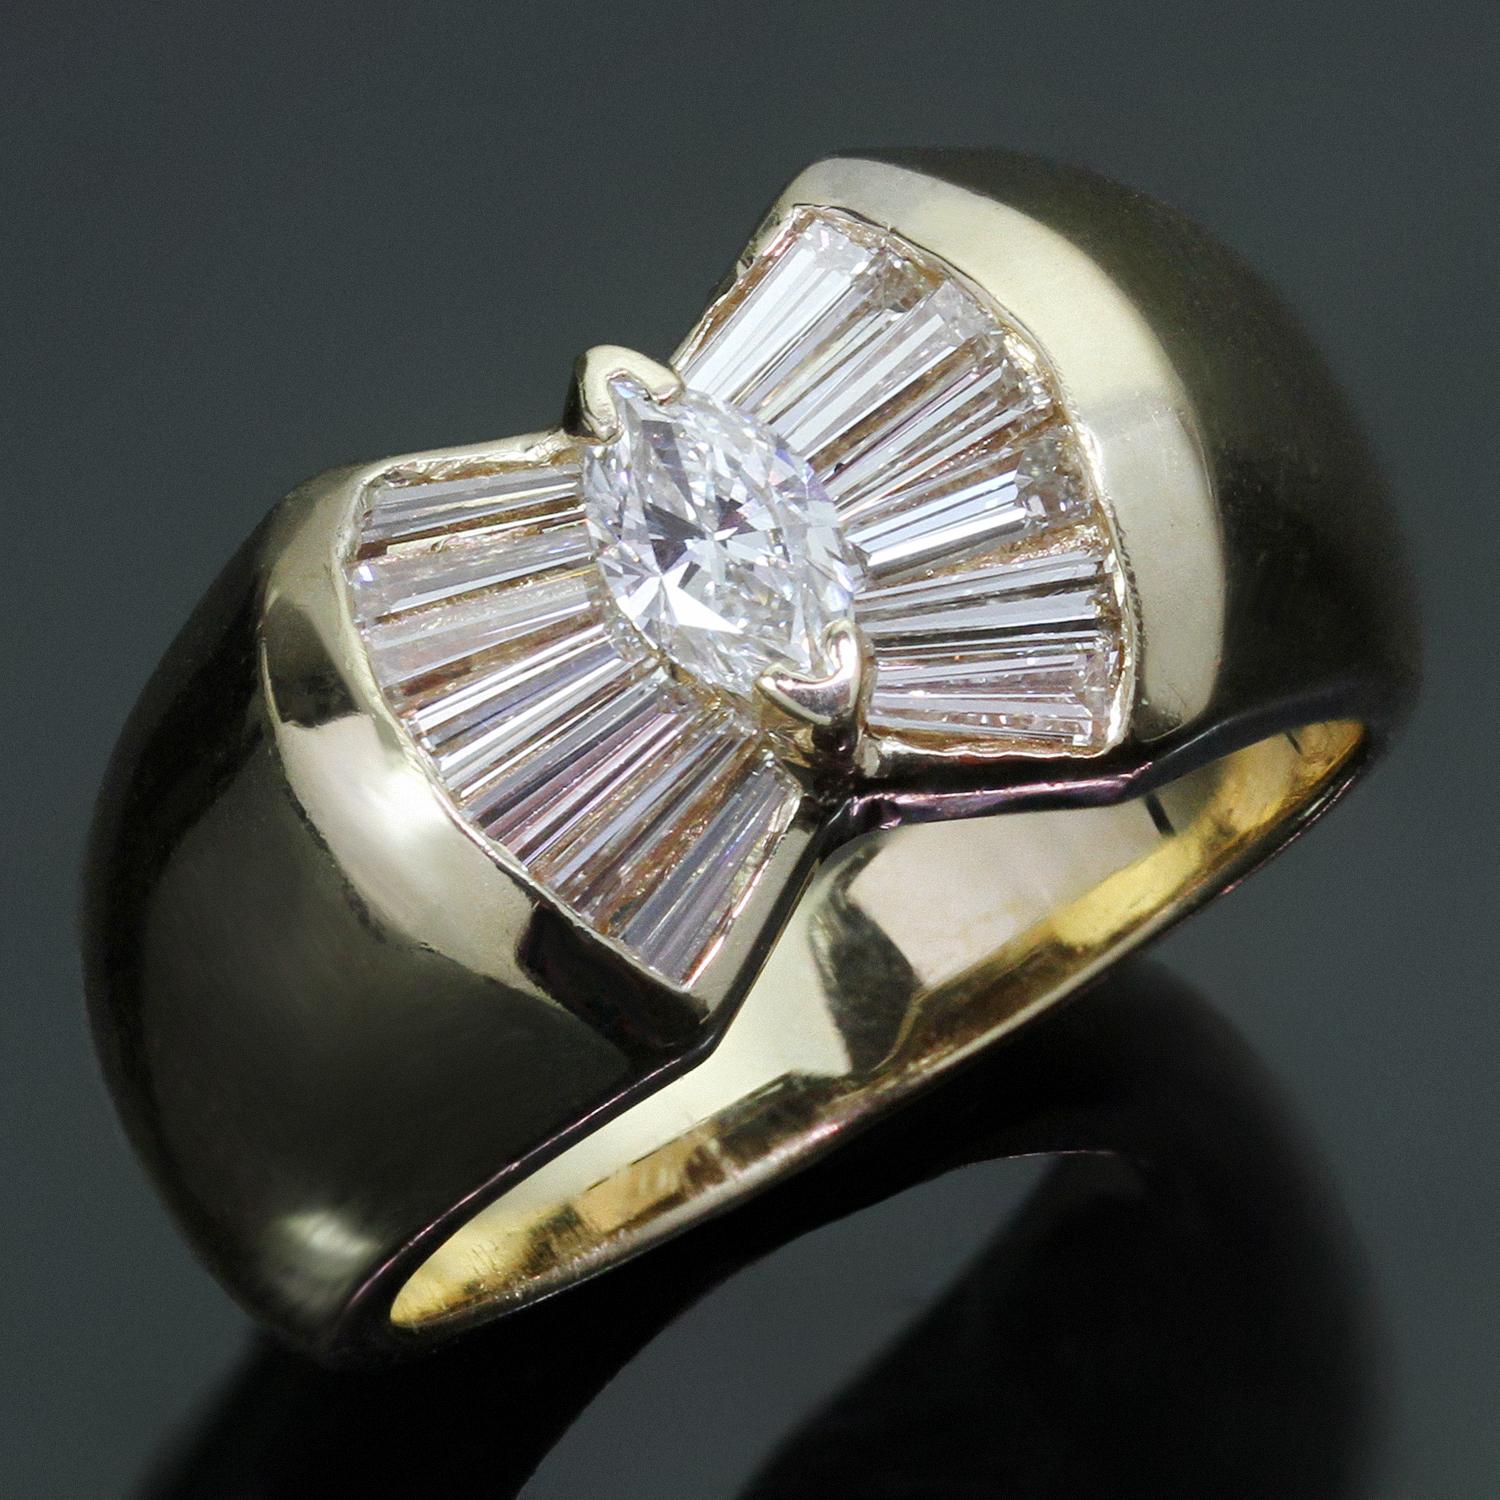 This fabulous retro women's ring is crafted in 14k yellow gold and set with a marquise diamond center stone weighing an estimated 0.25 carats, acented with 14 baguette-cut diamonds weighing an estimated 1.15. Made in United States circa 1980s.